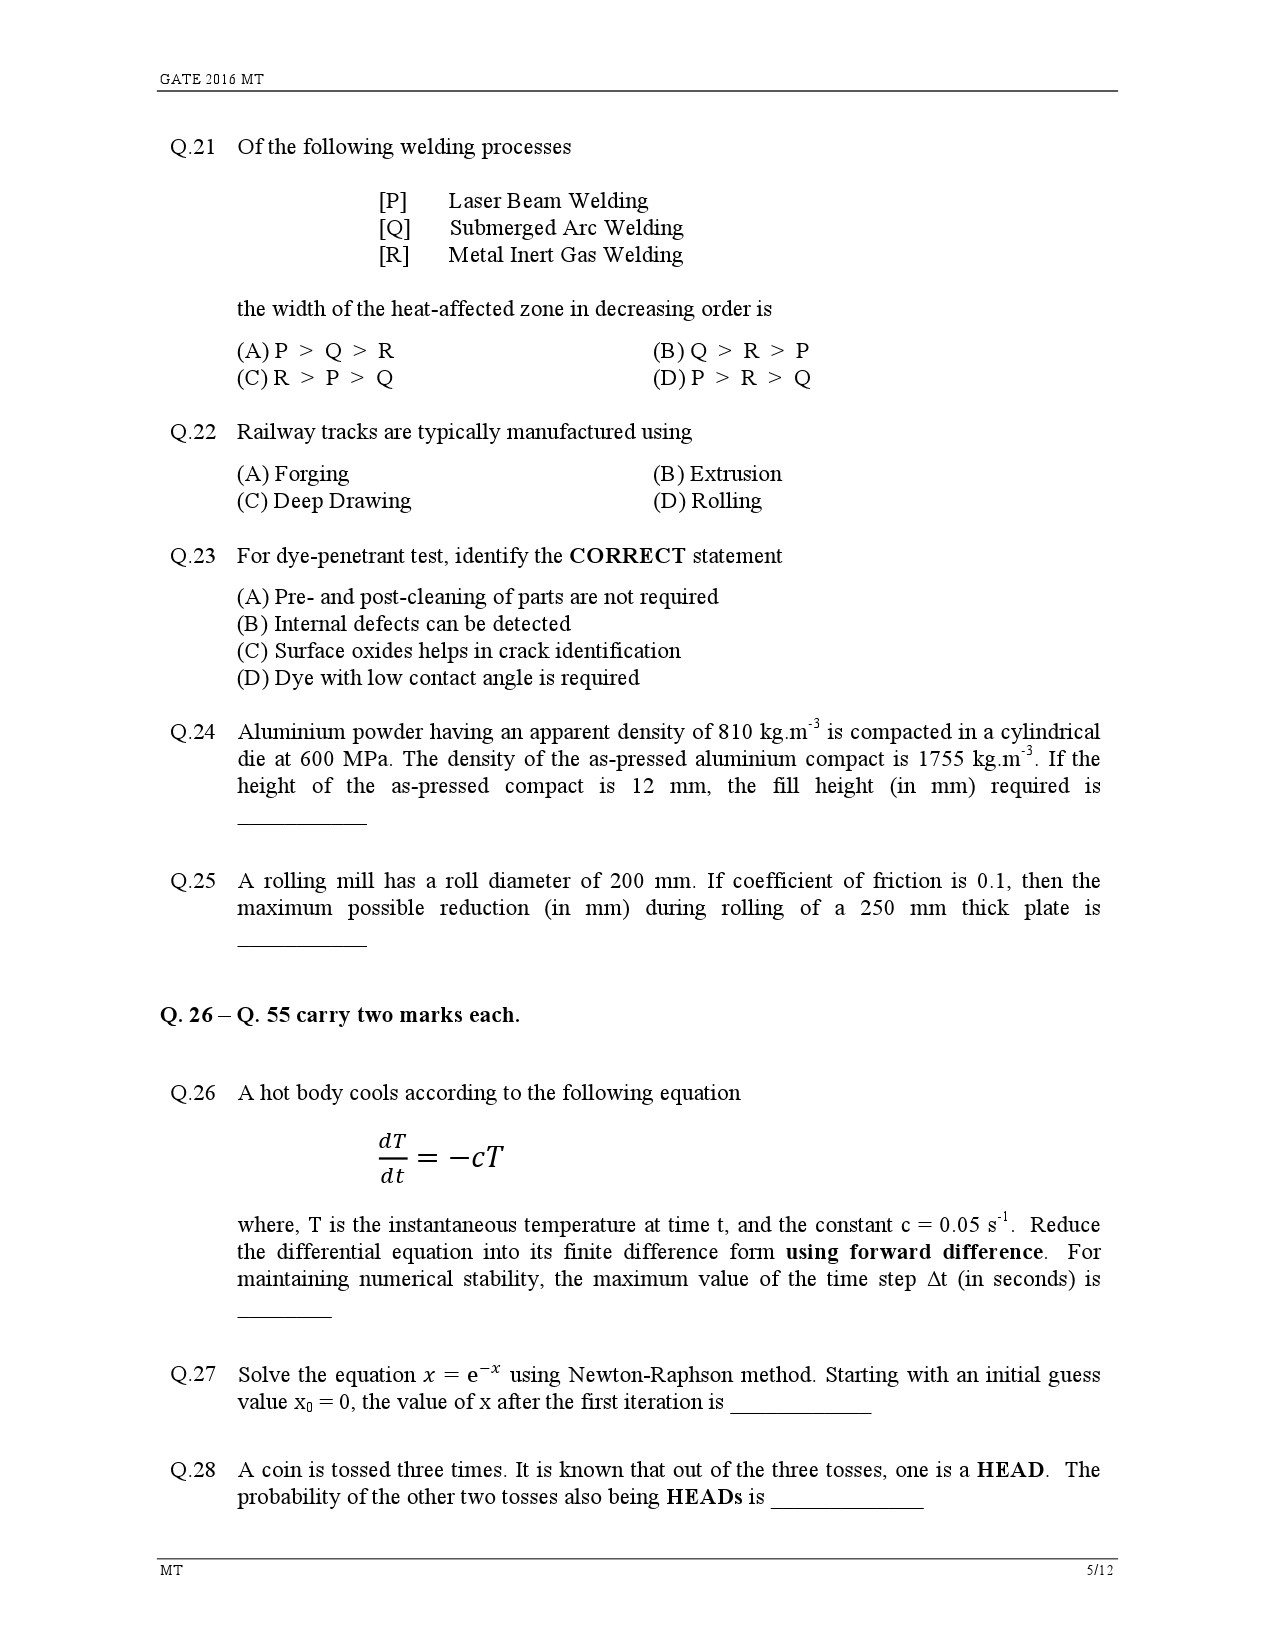 GATE Exam Question Paper 2016 Metallurgical Engineering 8